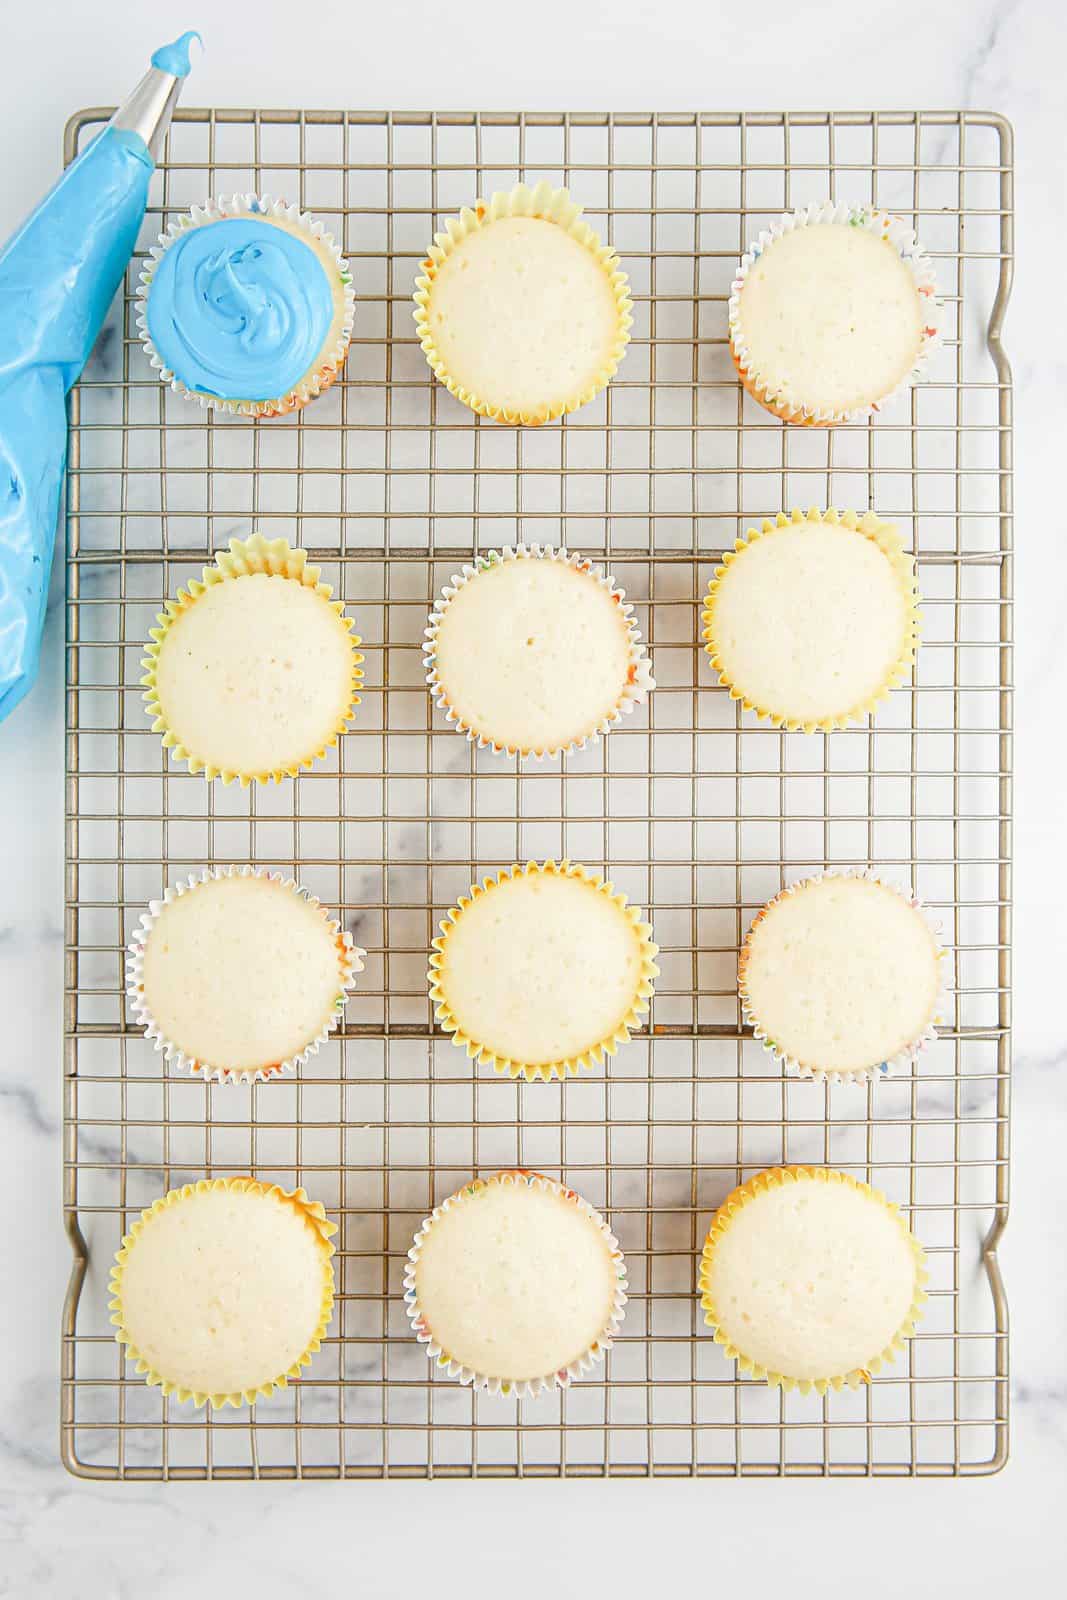 Cupcakes with one with blue frosting and a bag of frosting.